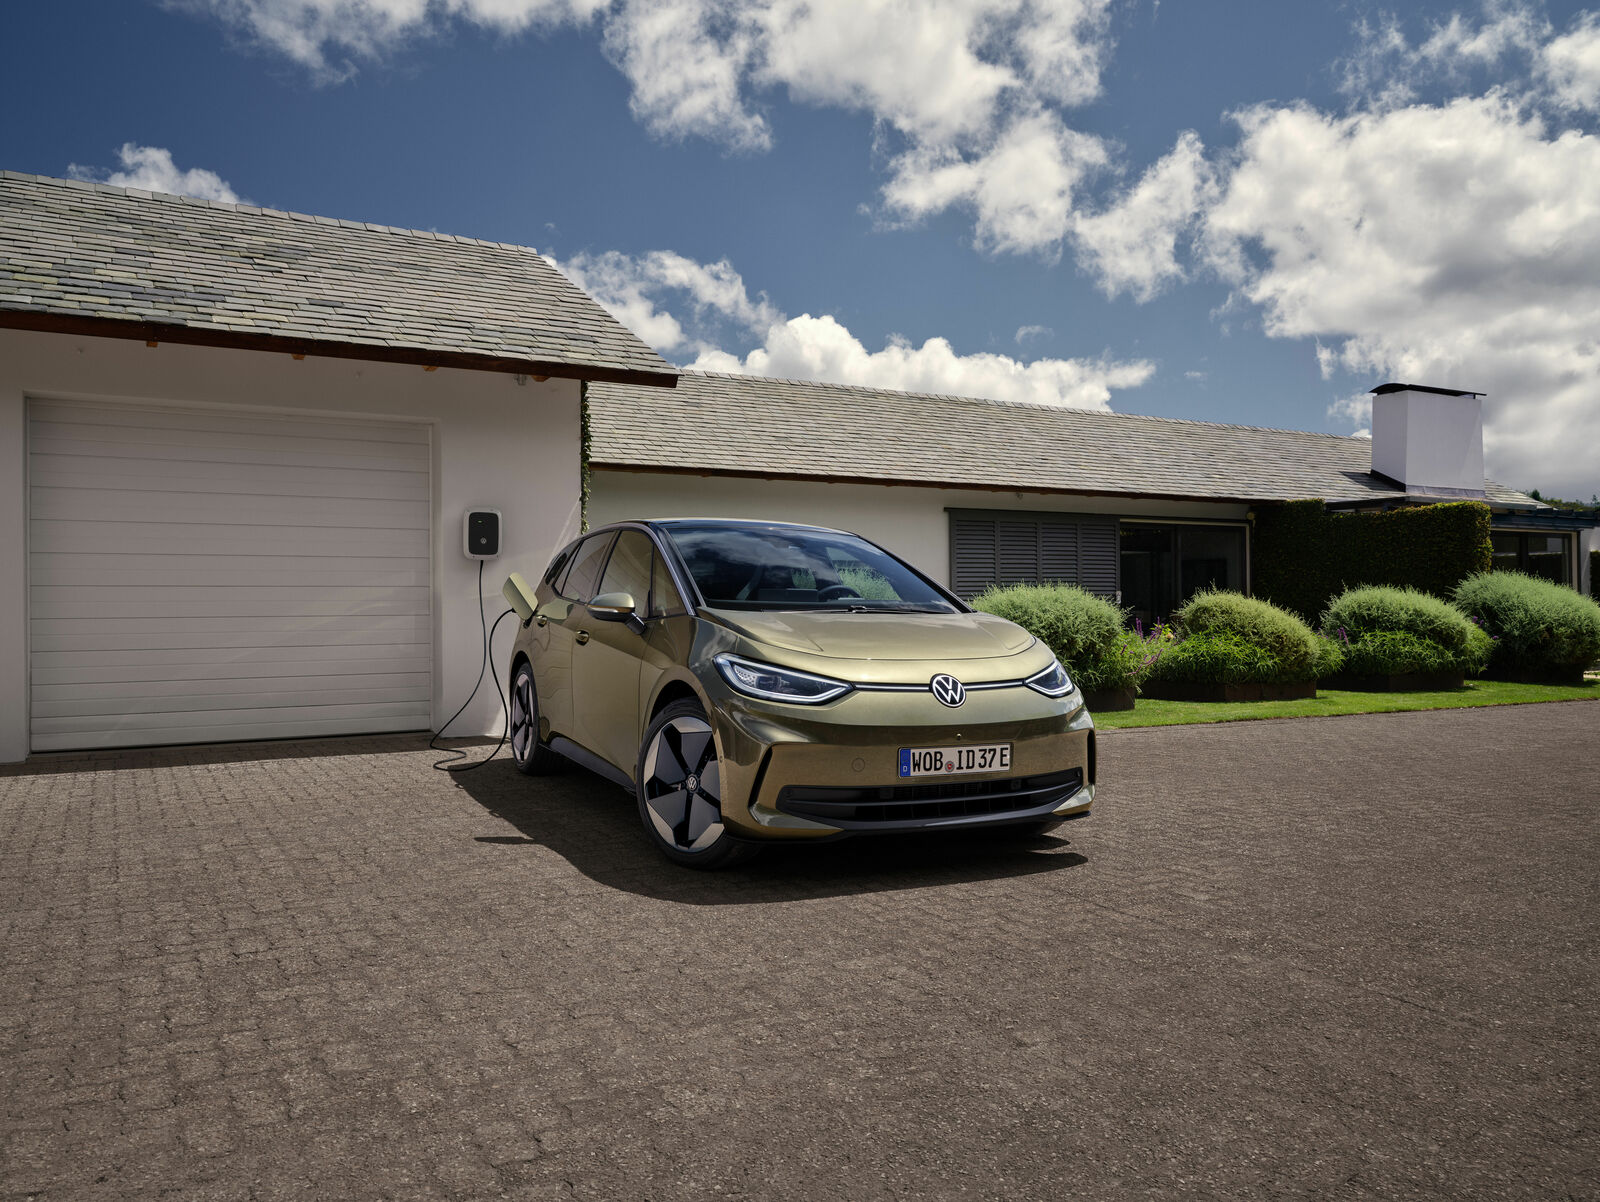 All-electric vehicles: A new age of mobility